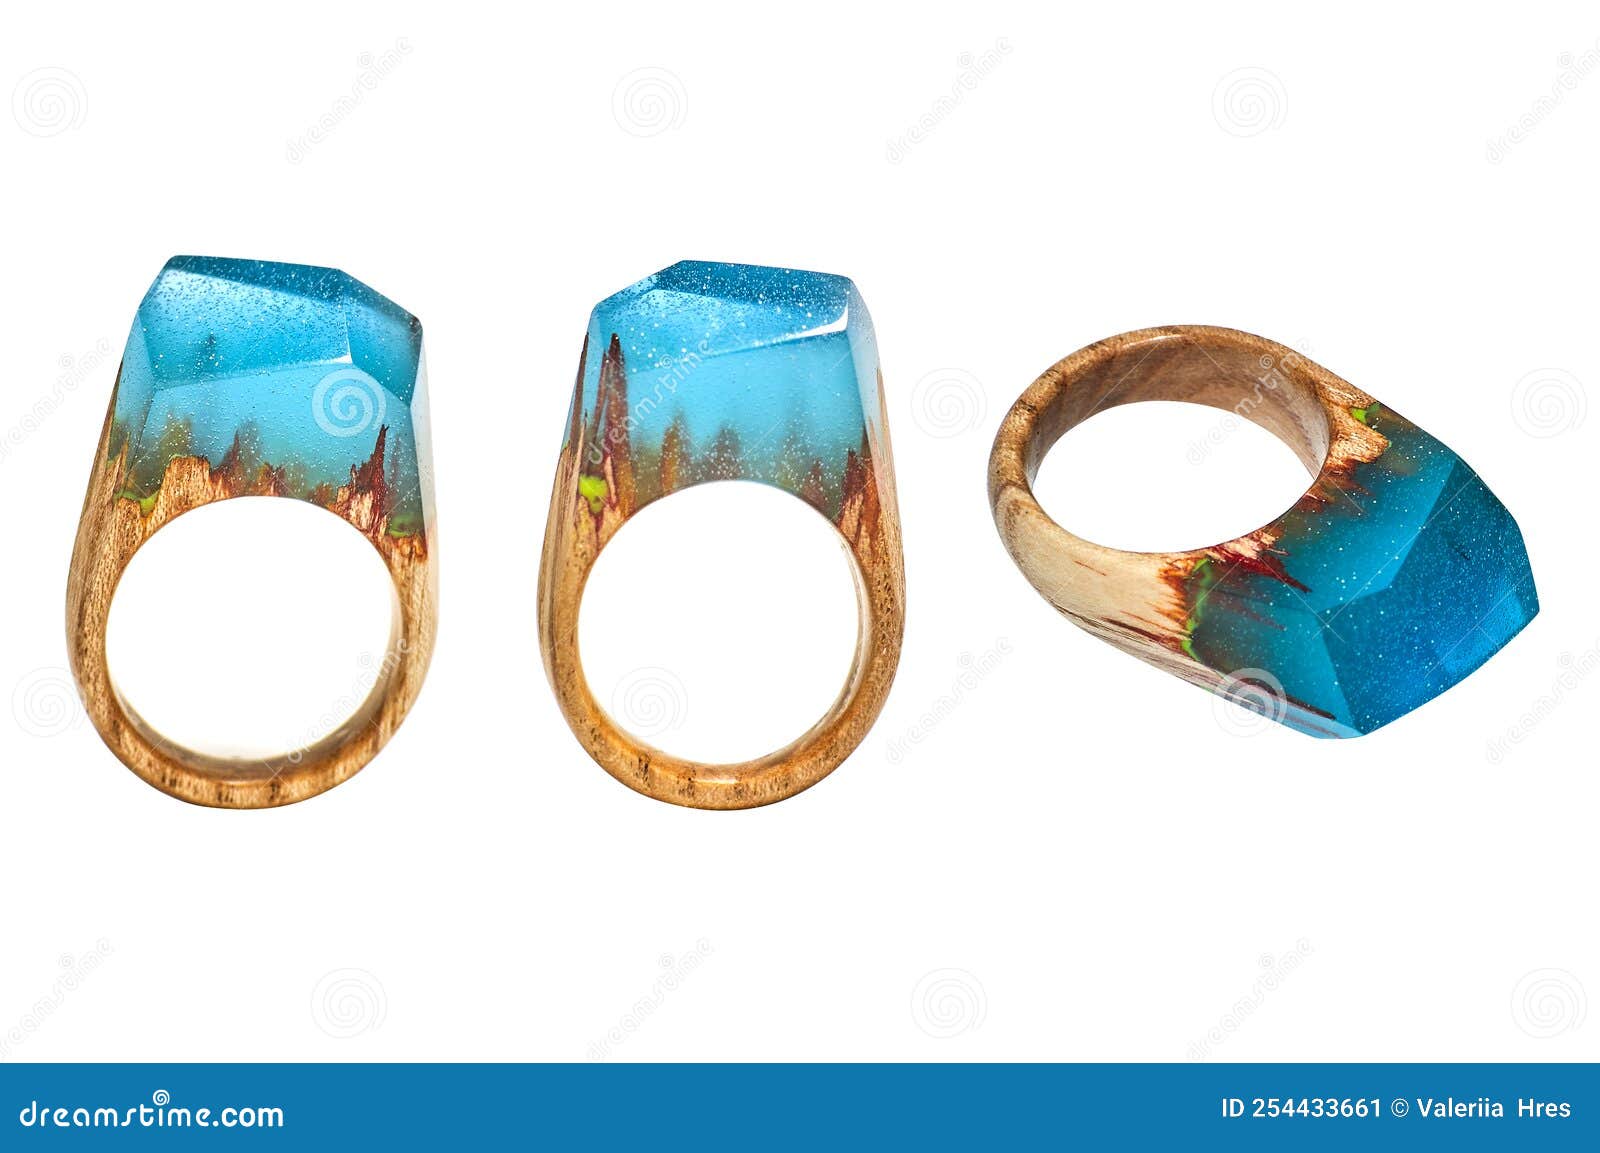 photo ring made epoxy resin eco friendly material to create beautiful things bright unusual gift girl often used decor 254433661